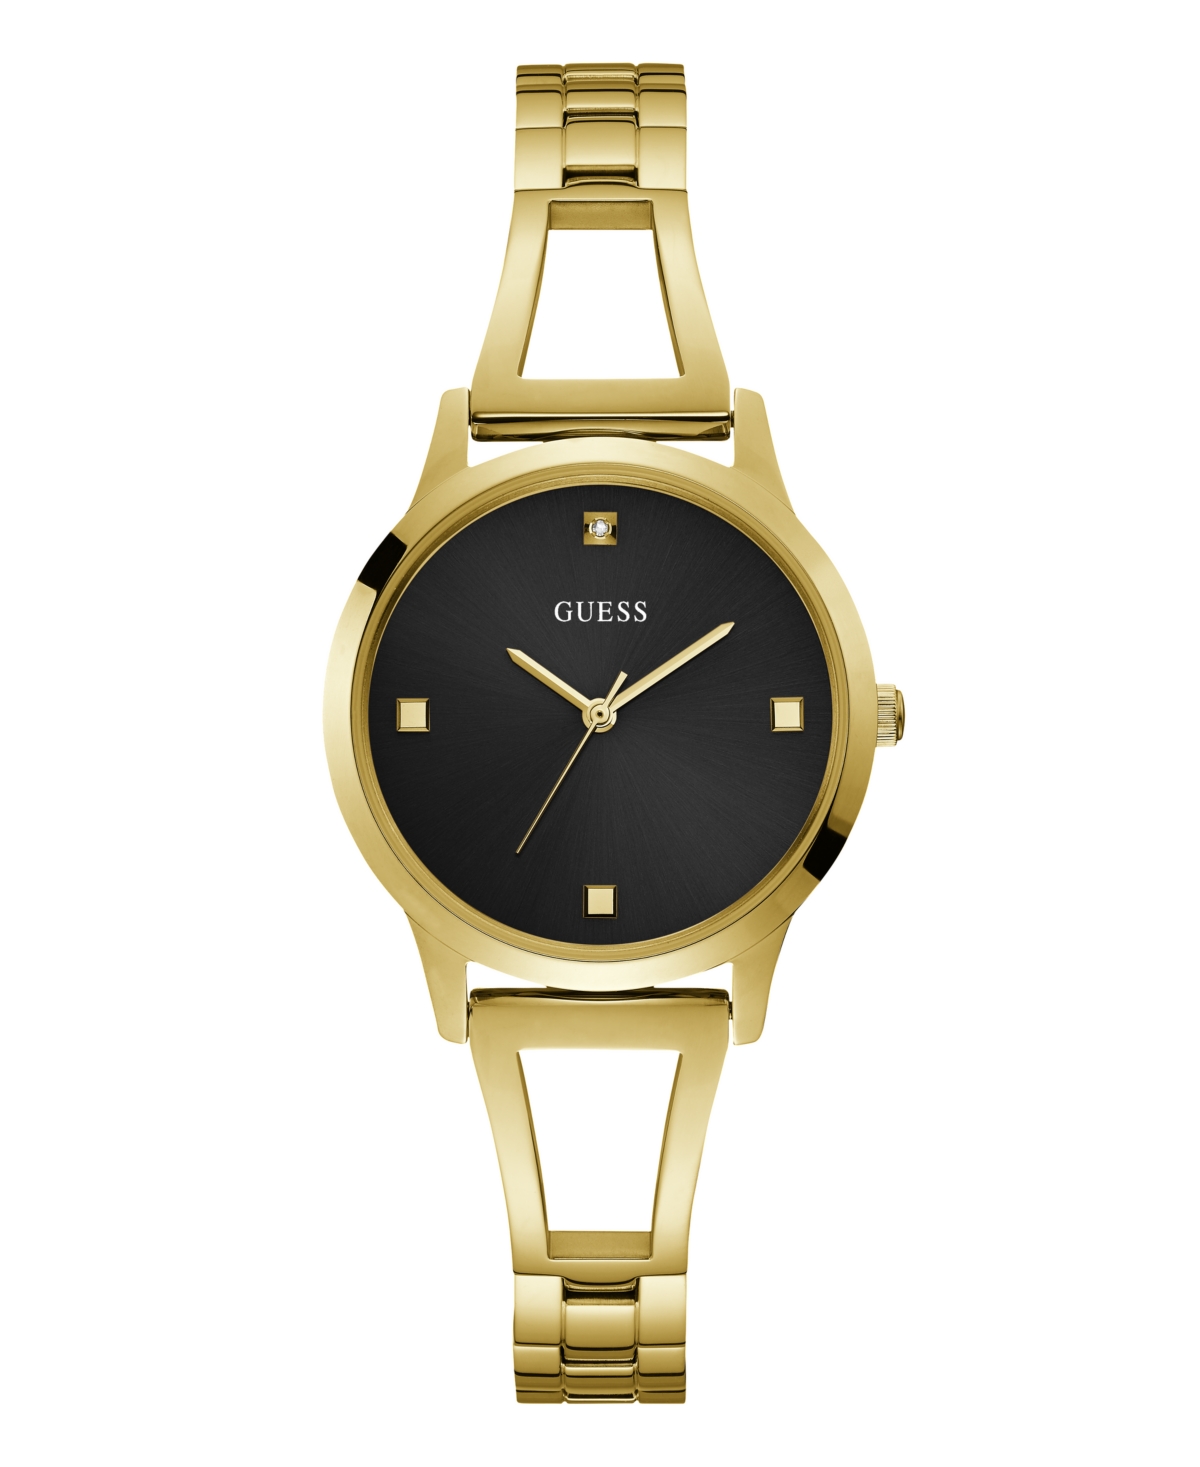 Guess Women's Analog Gold Tone Stainless Steel Watch 34 Mm